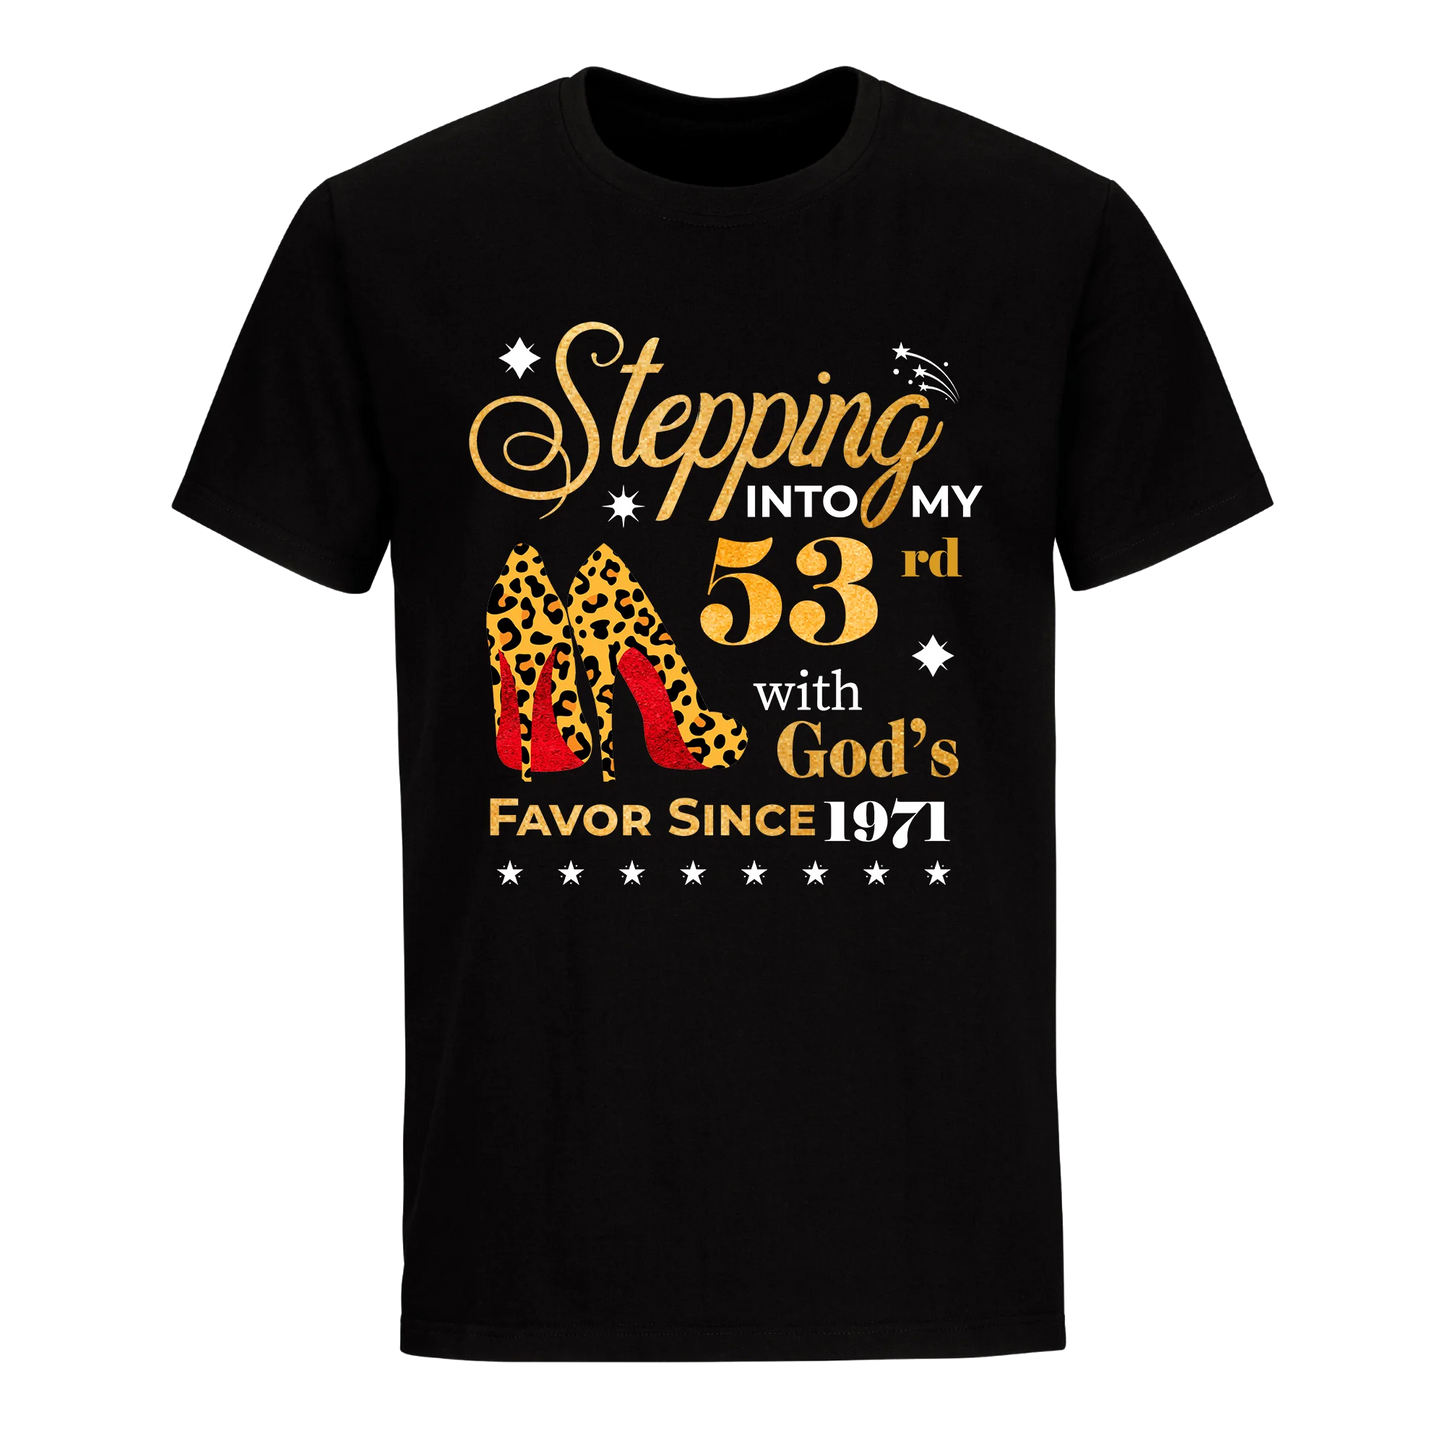 STEPPING INTO MY 53RD WITH GOD'S FAVOR SINCE 1971 UNISEX SHIRT